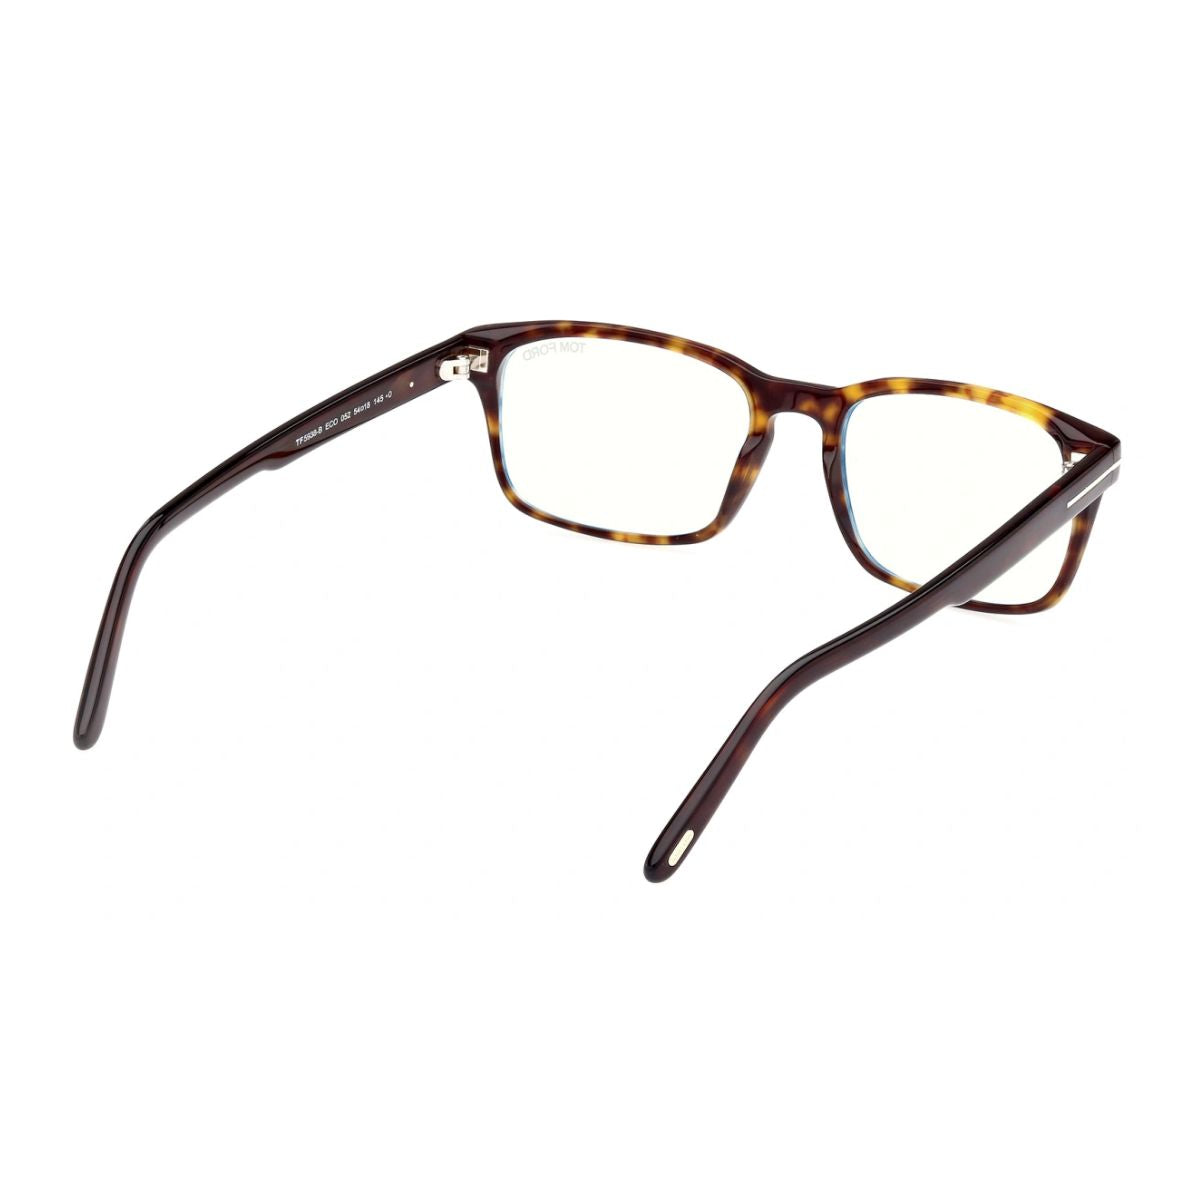 "Sophisticated and branded Tom Ford TF 5938 052 eyewear for men, rectangular Havana optical glasses, shop at Optorium Online with free shipping."